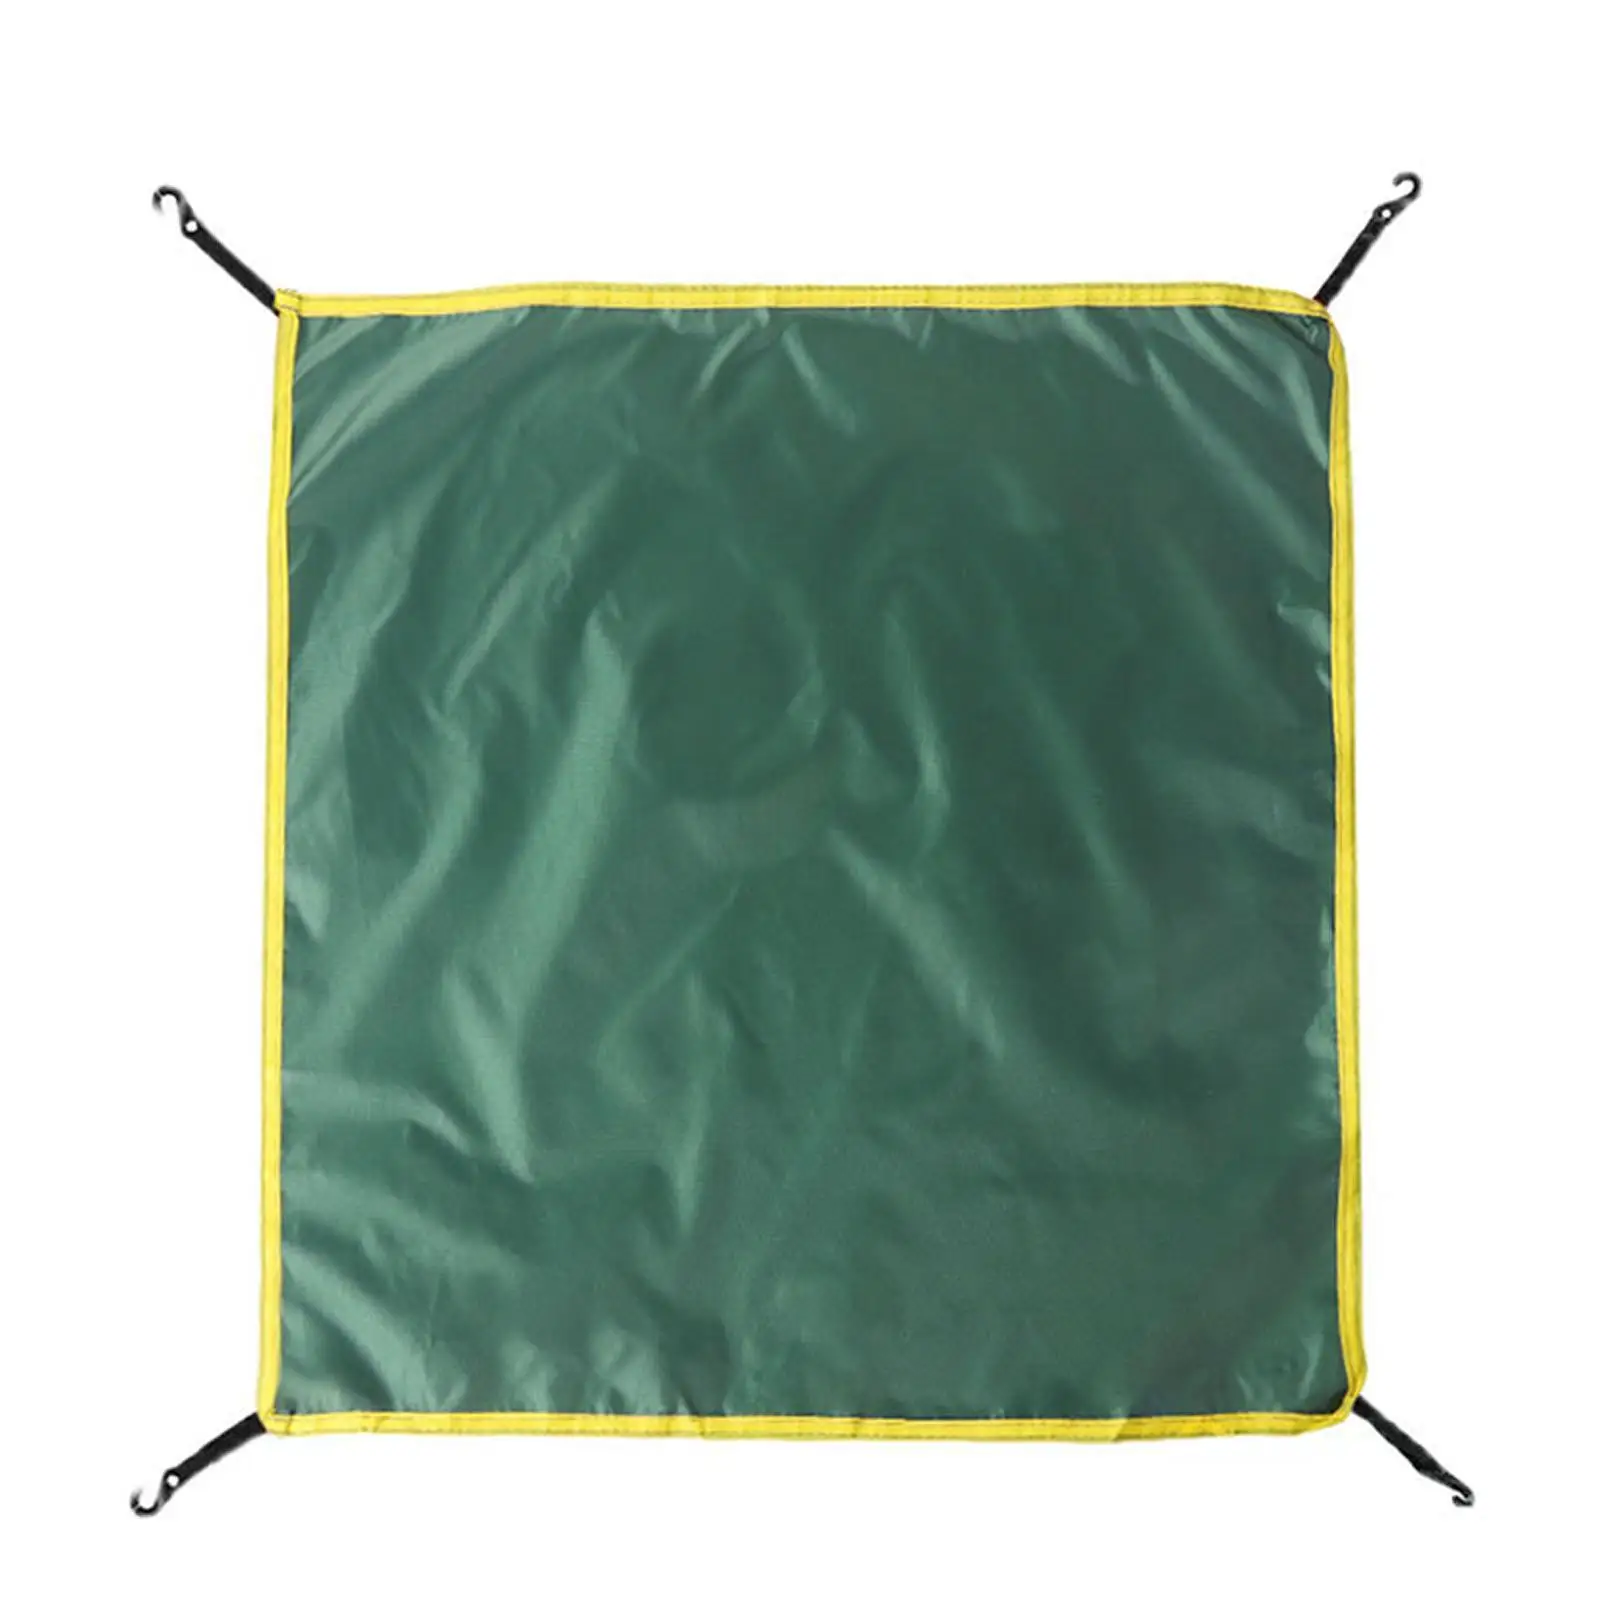 Rain Fly Accessory - Fits 3-4 Person Instant Tent (3.6 Foot X 3.6 Foot) Camping Tents, Rain Fly ONLY